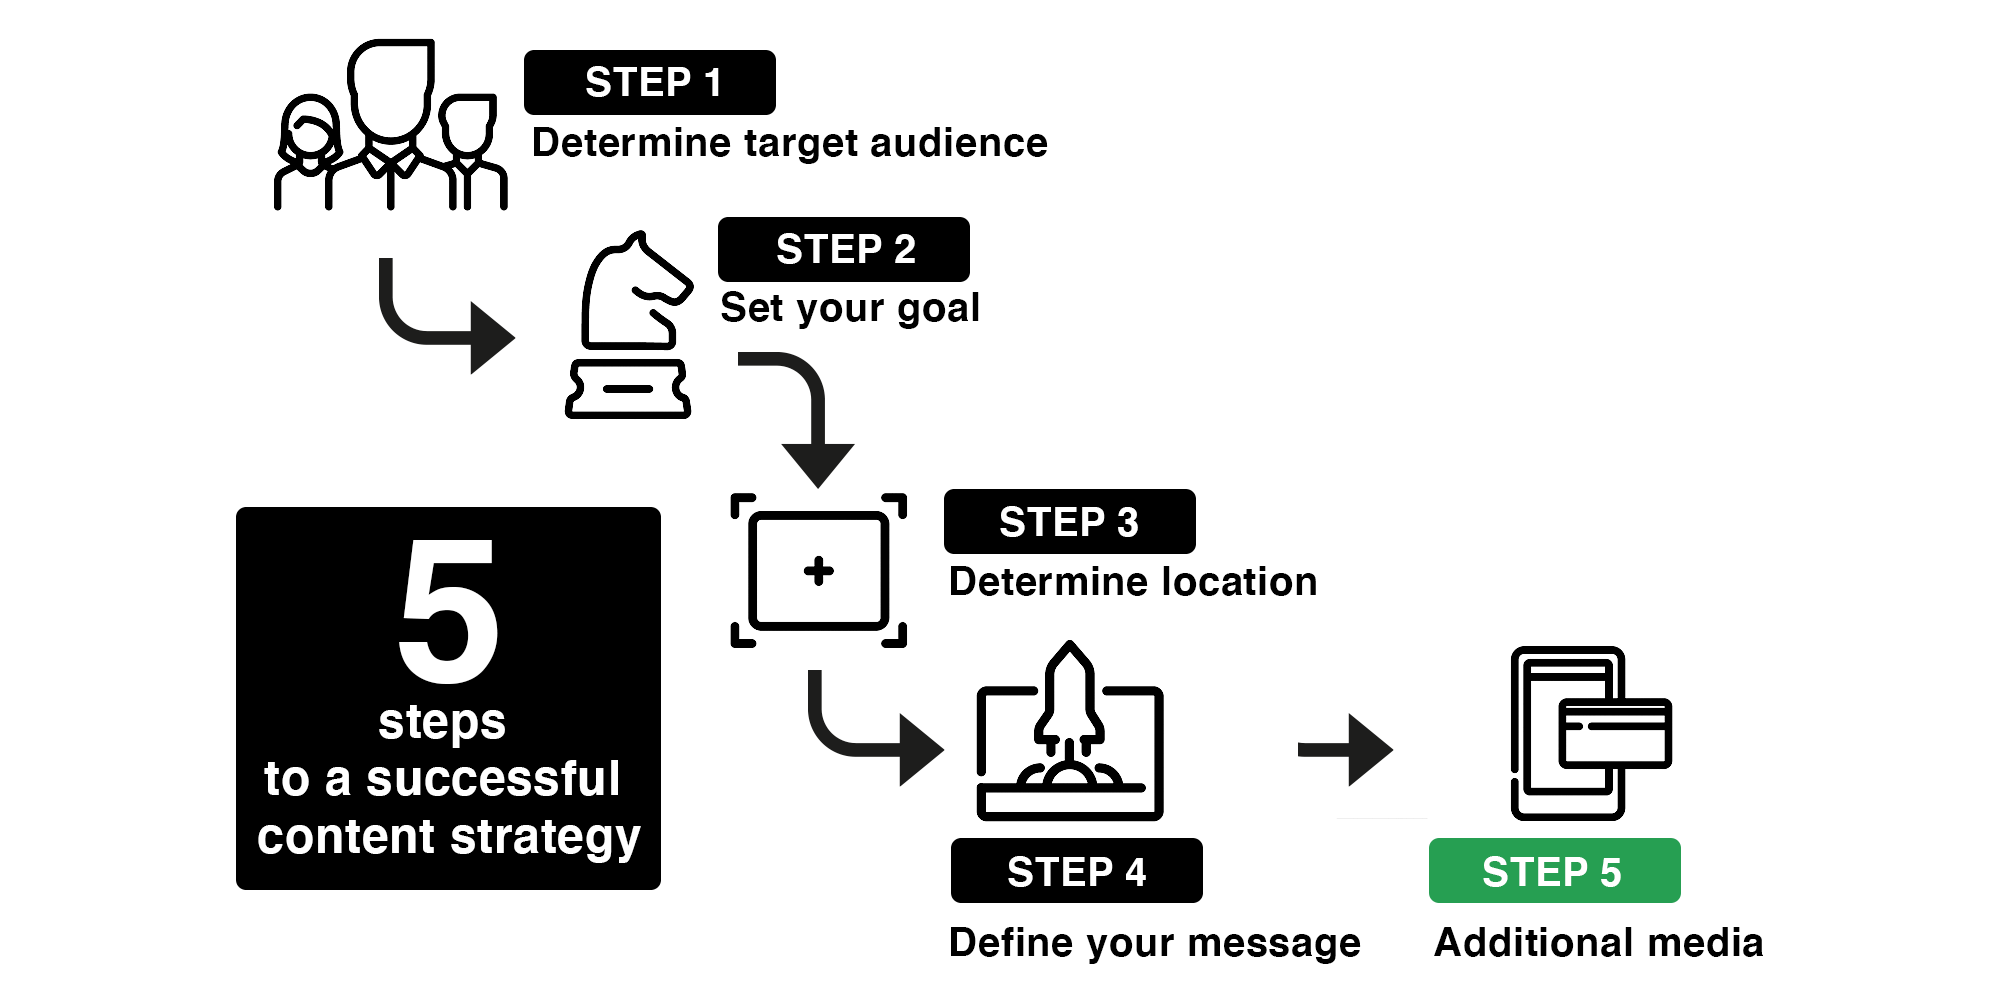 Step 5 of creating a Content Strategy in 5 steps